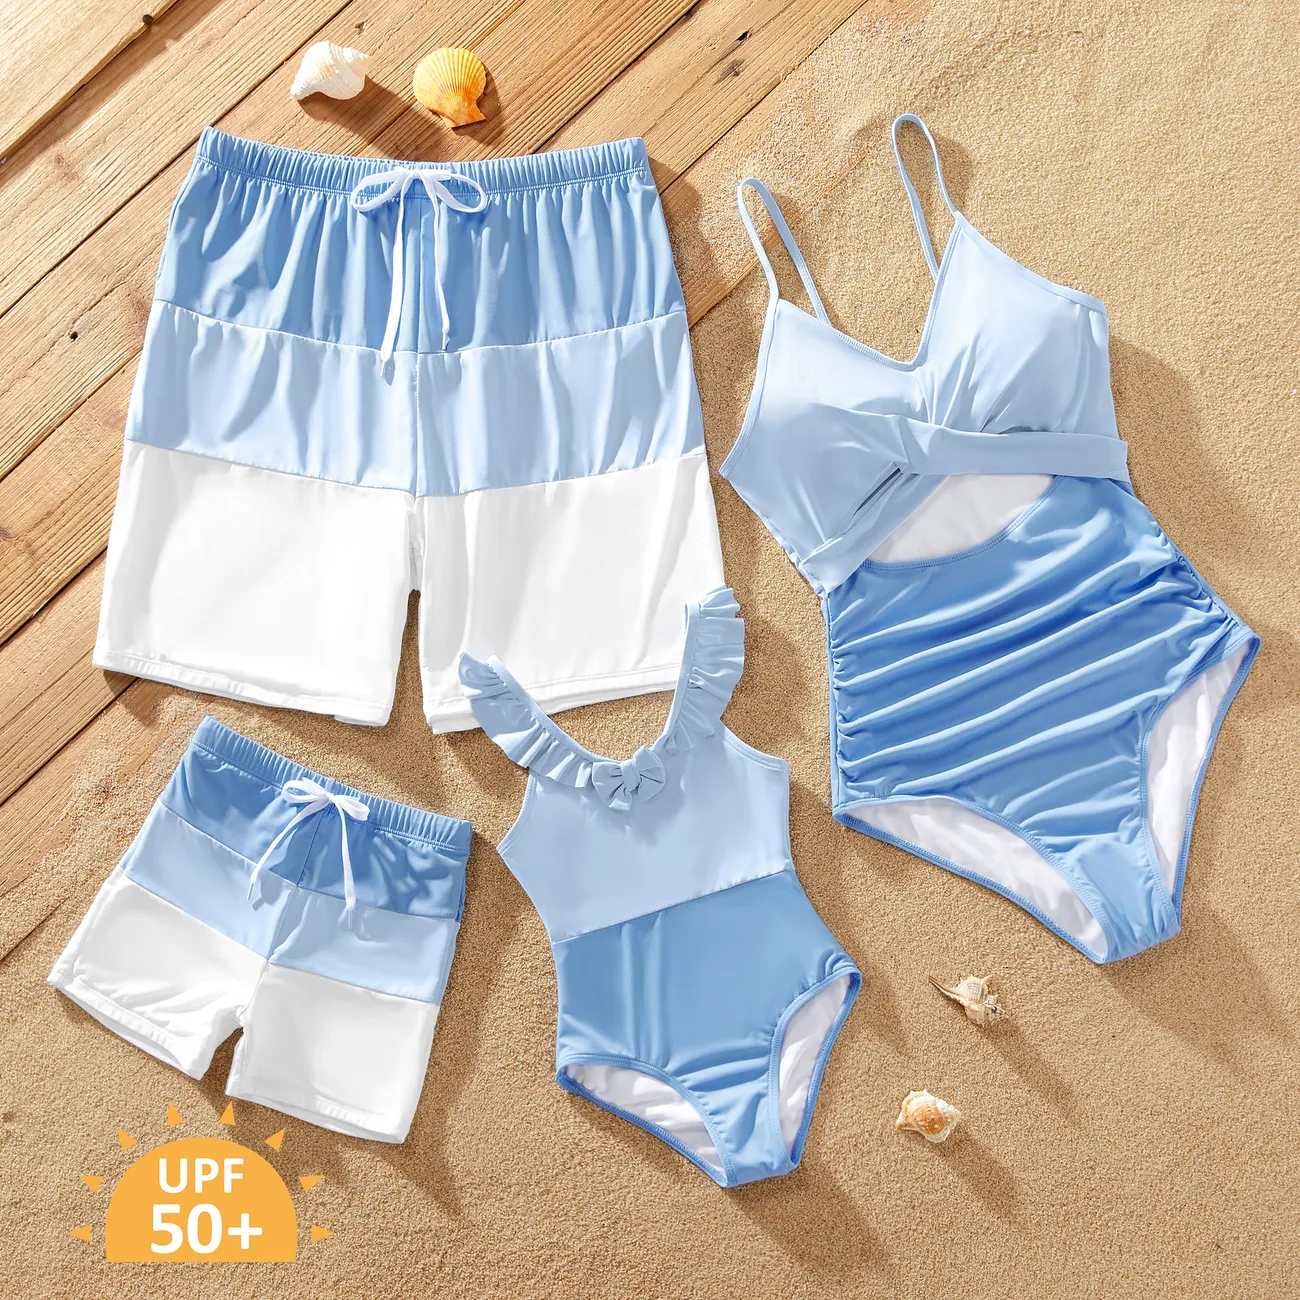 Family Matching Swimsuit Colorblock Drawstring Swim Trunks or Cross Front Cut out Ruched One-Piece Swimsuit (Sun-Protective) Blue big image 1